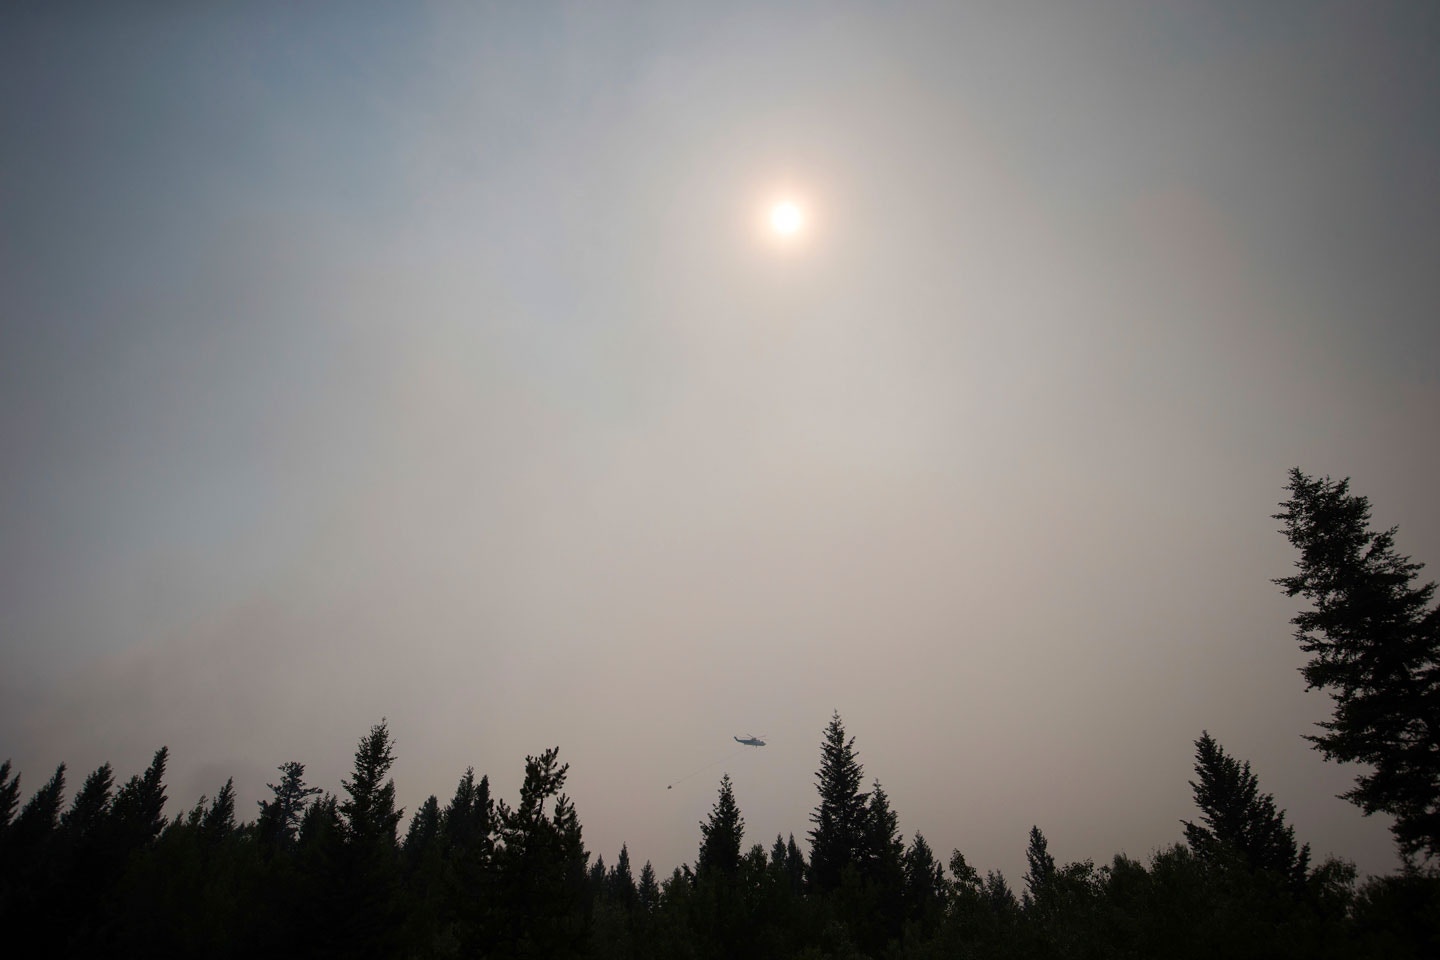 Smoke obscures the sun as a helicopter carrying a bucket battles the Gustafsen wildfire near 100 Mile House, B.C., on Saturday July 8, 2017. More than 180 fires were burning, many considered out of control, as the B.C. government declared a provincewide state of emergency to co-ordinate the crisis response. Officials said buildings have been destroyed, but they did not release numbers. The BC Wildfire Service says over 173 fires were reported on Friday alone as lightning storms rolled over several parts of B.C. (Darryl Dyck/The Canadian Press via AP)